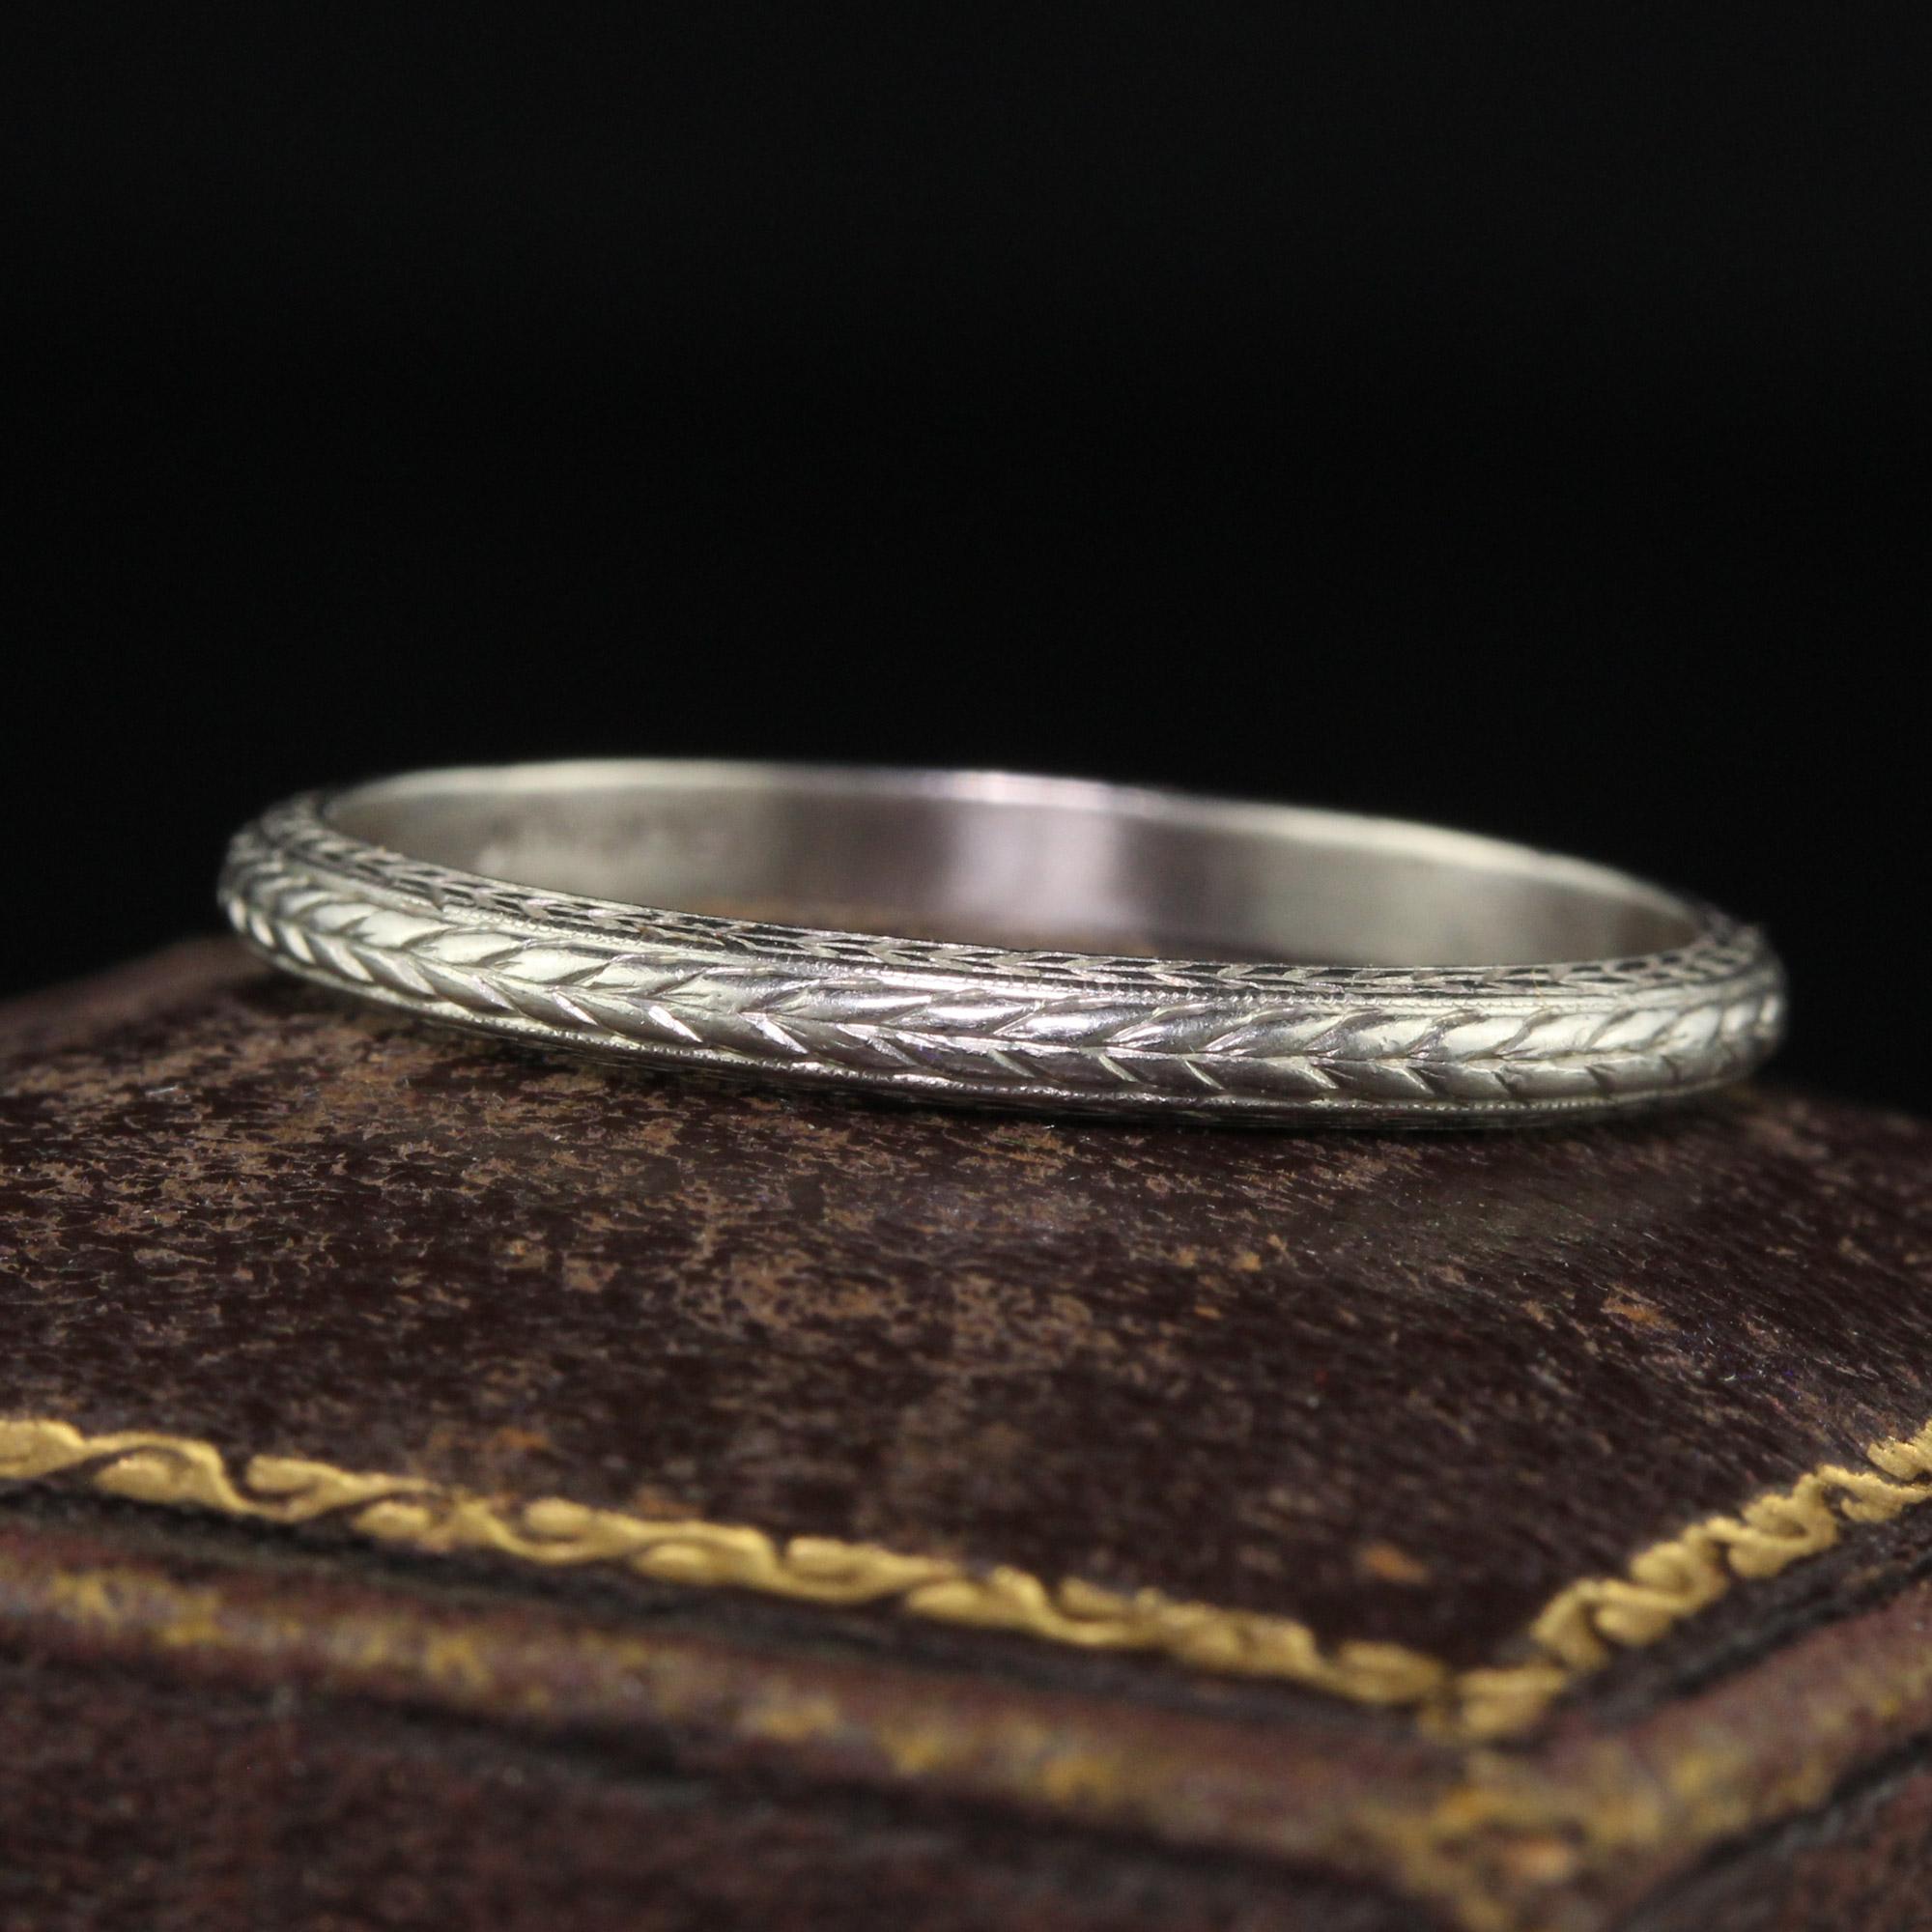 Beautiful Antique Art Deco Platinum Wheat Engraved Wedding Band - Size 8 1/2. This incredible wedding band is crafted in platinum. The ring has crisp engravings going around the entire top and sides of the ring. It appears the ring was barely worn